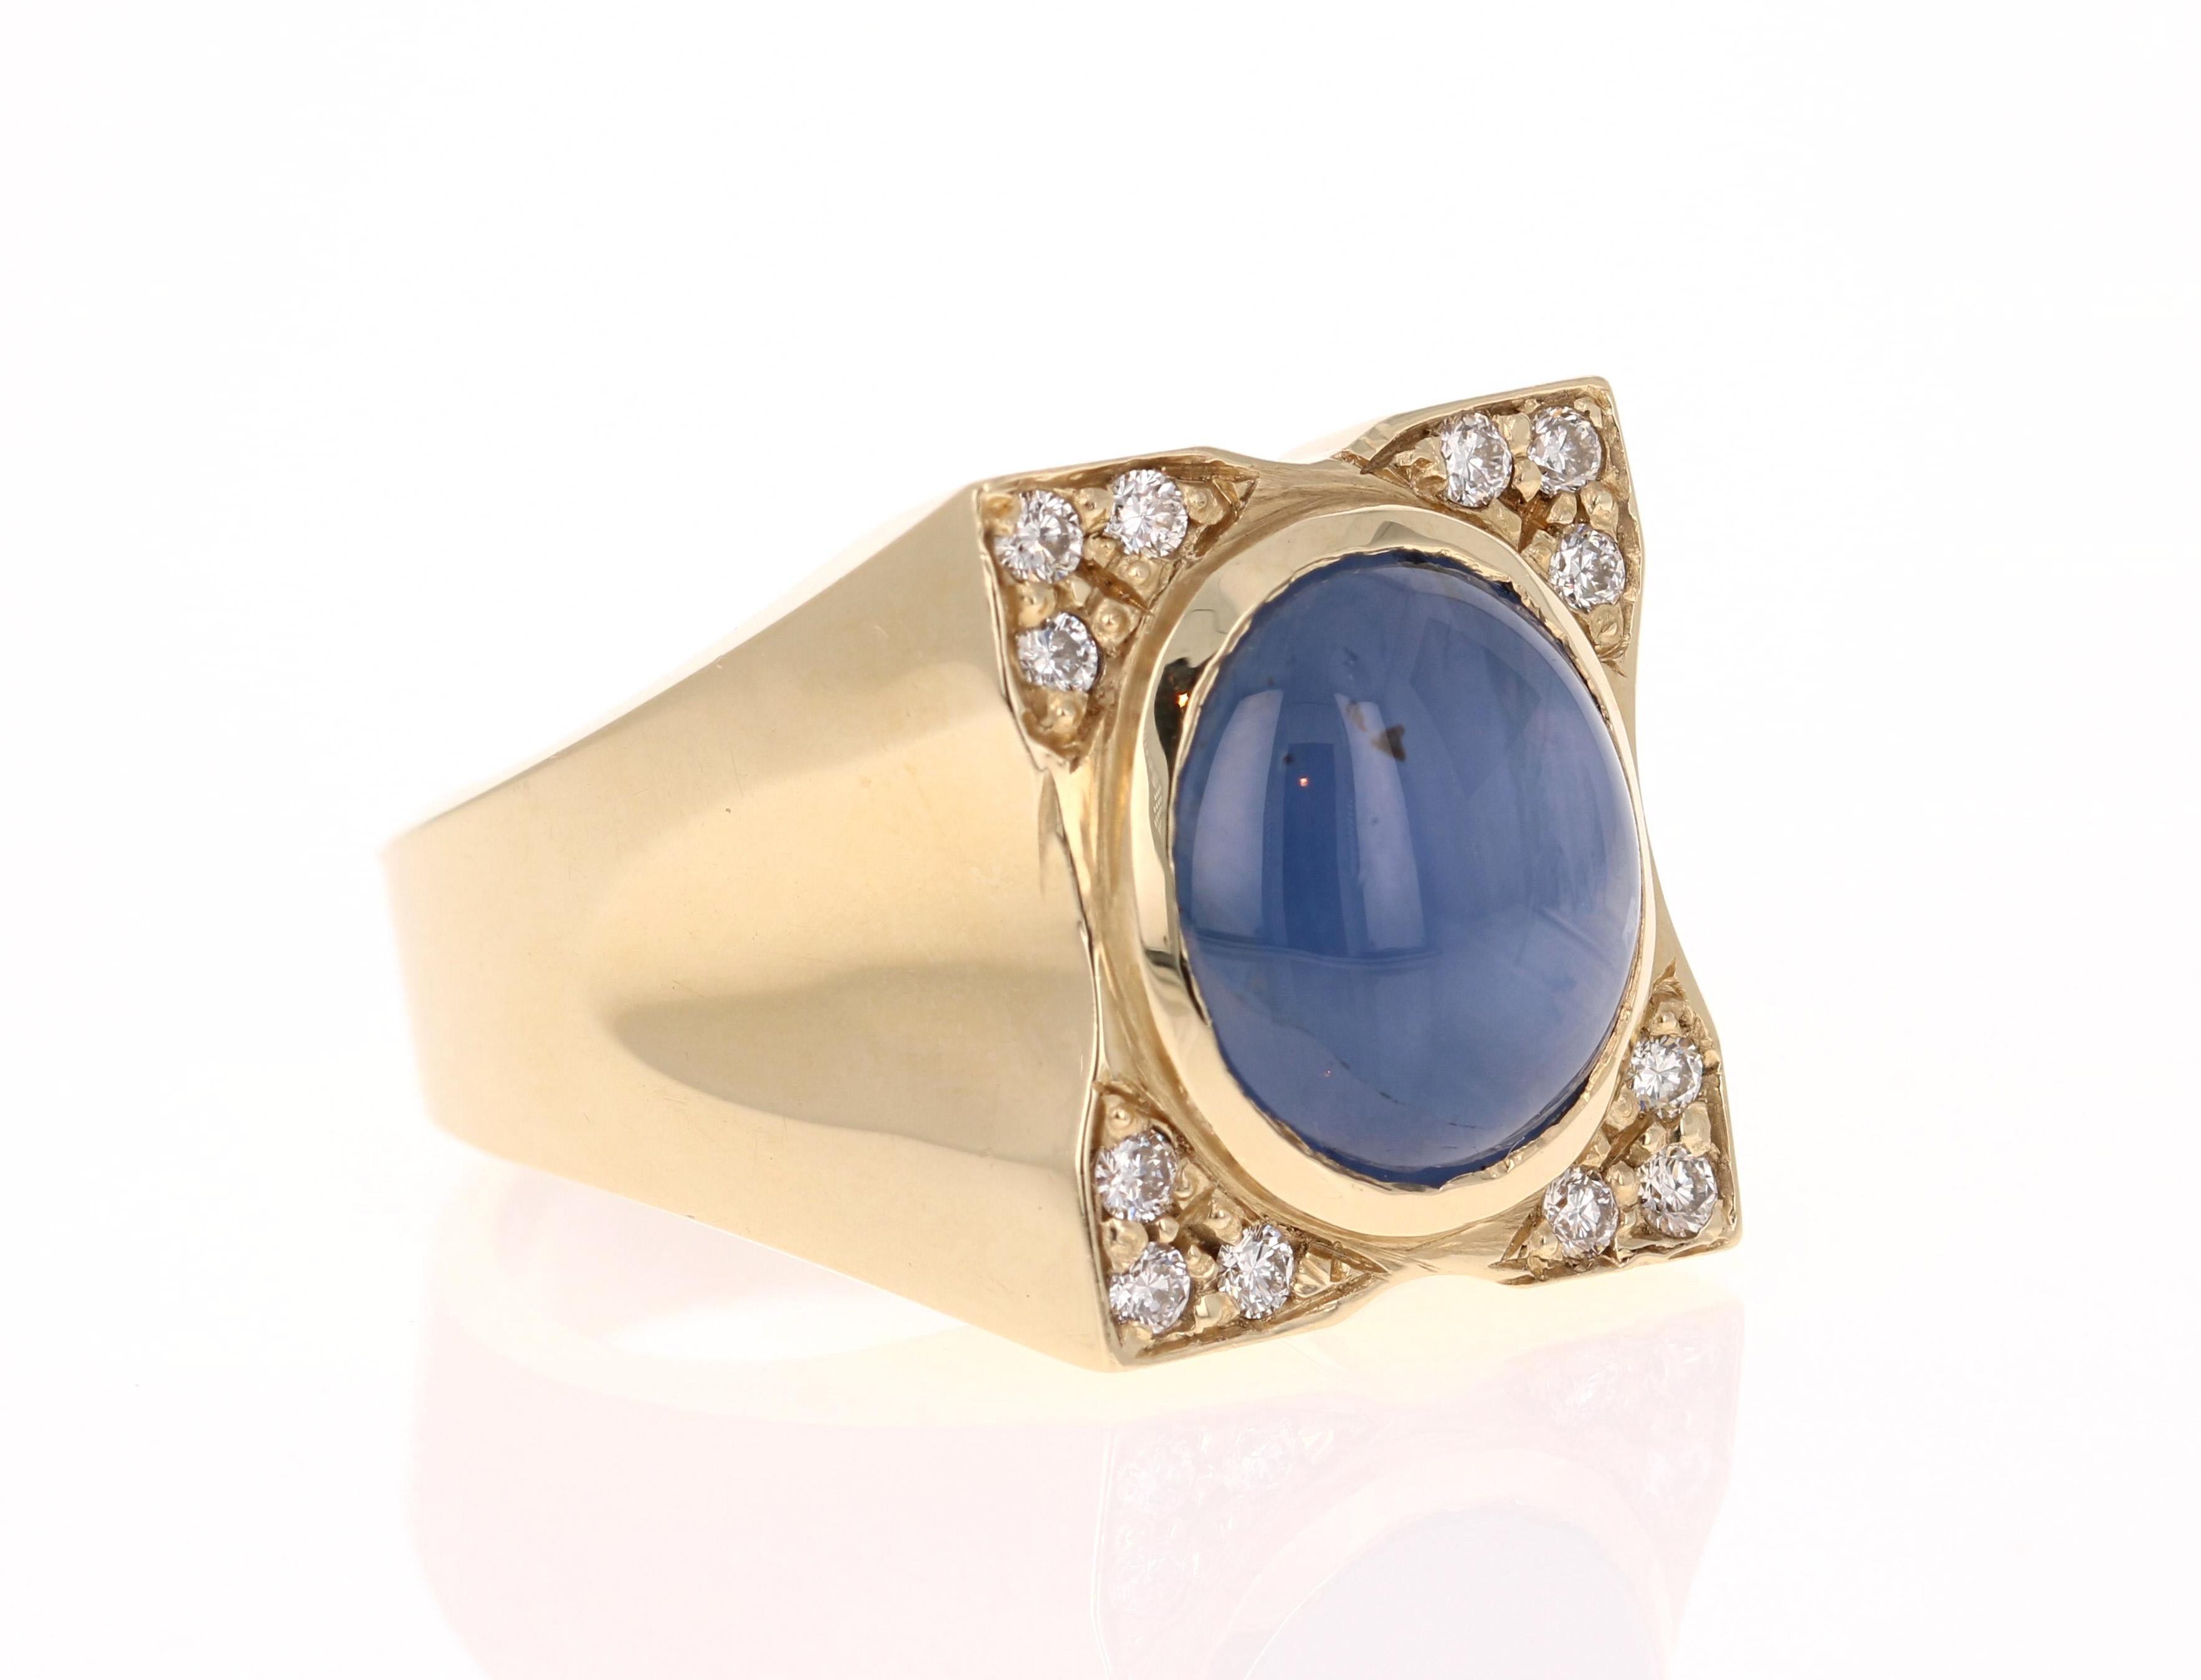 We also carry a unique Men's Collection of Wedding Bands & Rings! 

This amazing piece is set with a natural Burmese Blue Sapphire that has No indications of heating. It weighs 8.12 Carats. It also has 12 Round Cut Diamonds that weigh 0.27 Carats.